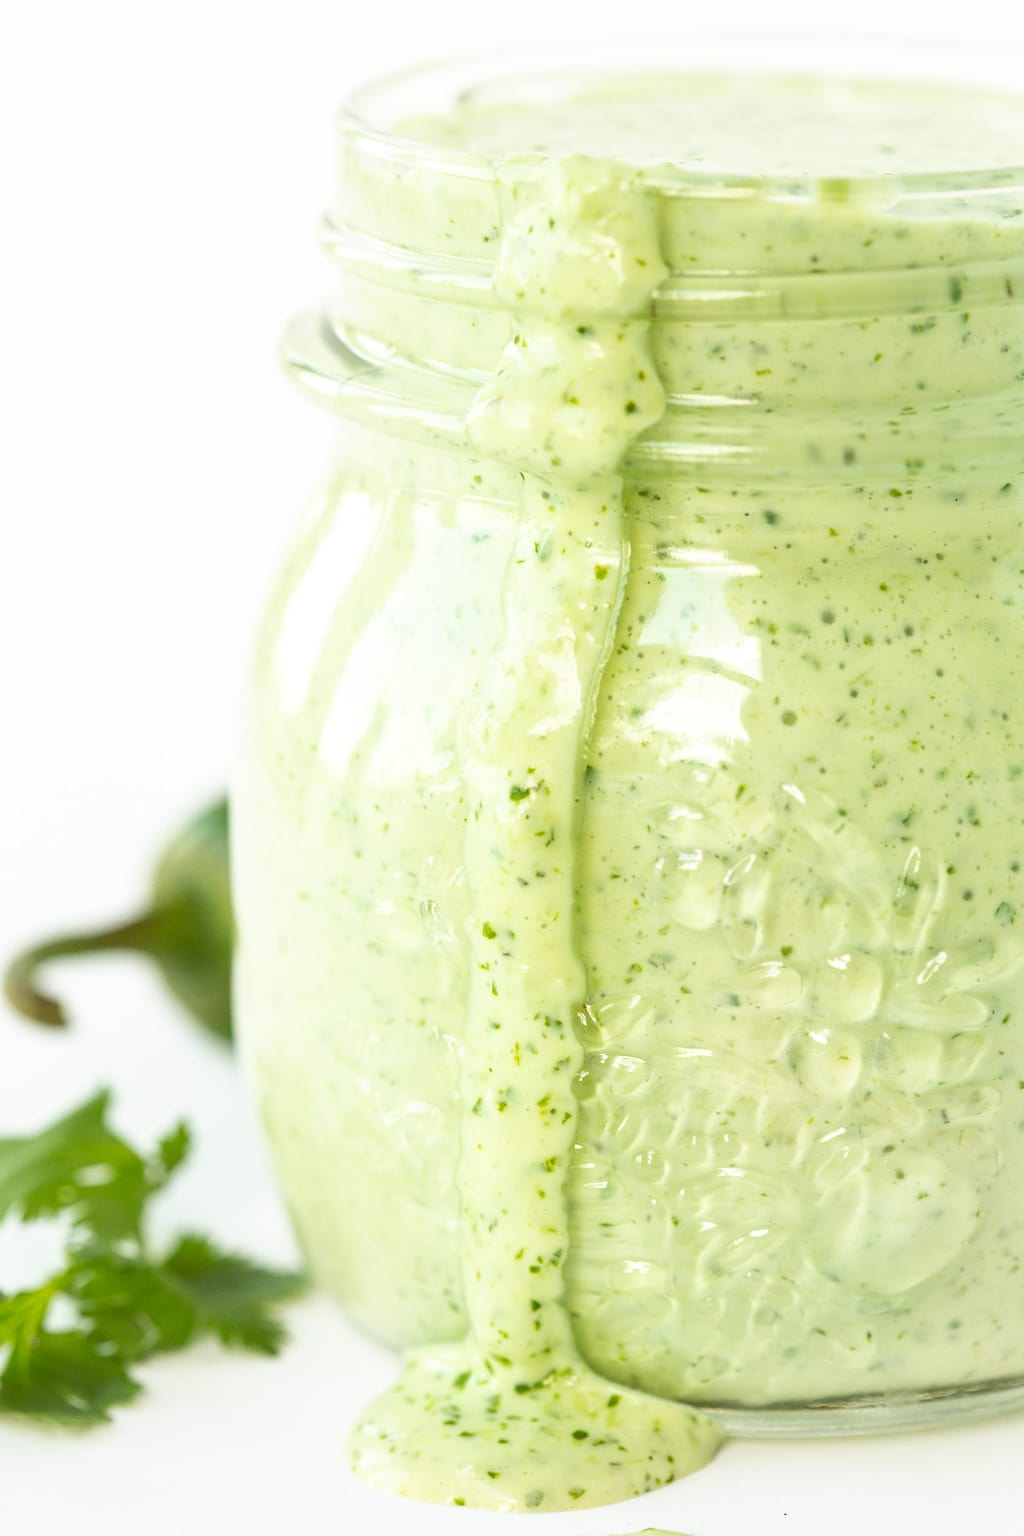 Vertical closeup photo of a glass jar filled with Light and Spicy Southwestern Cilantro Buttermilk Dressing.